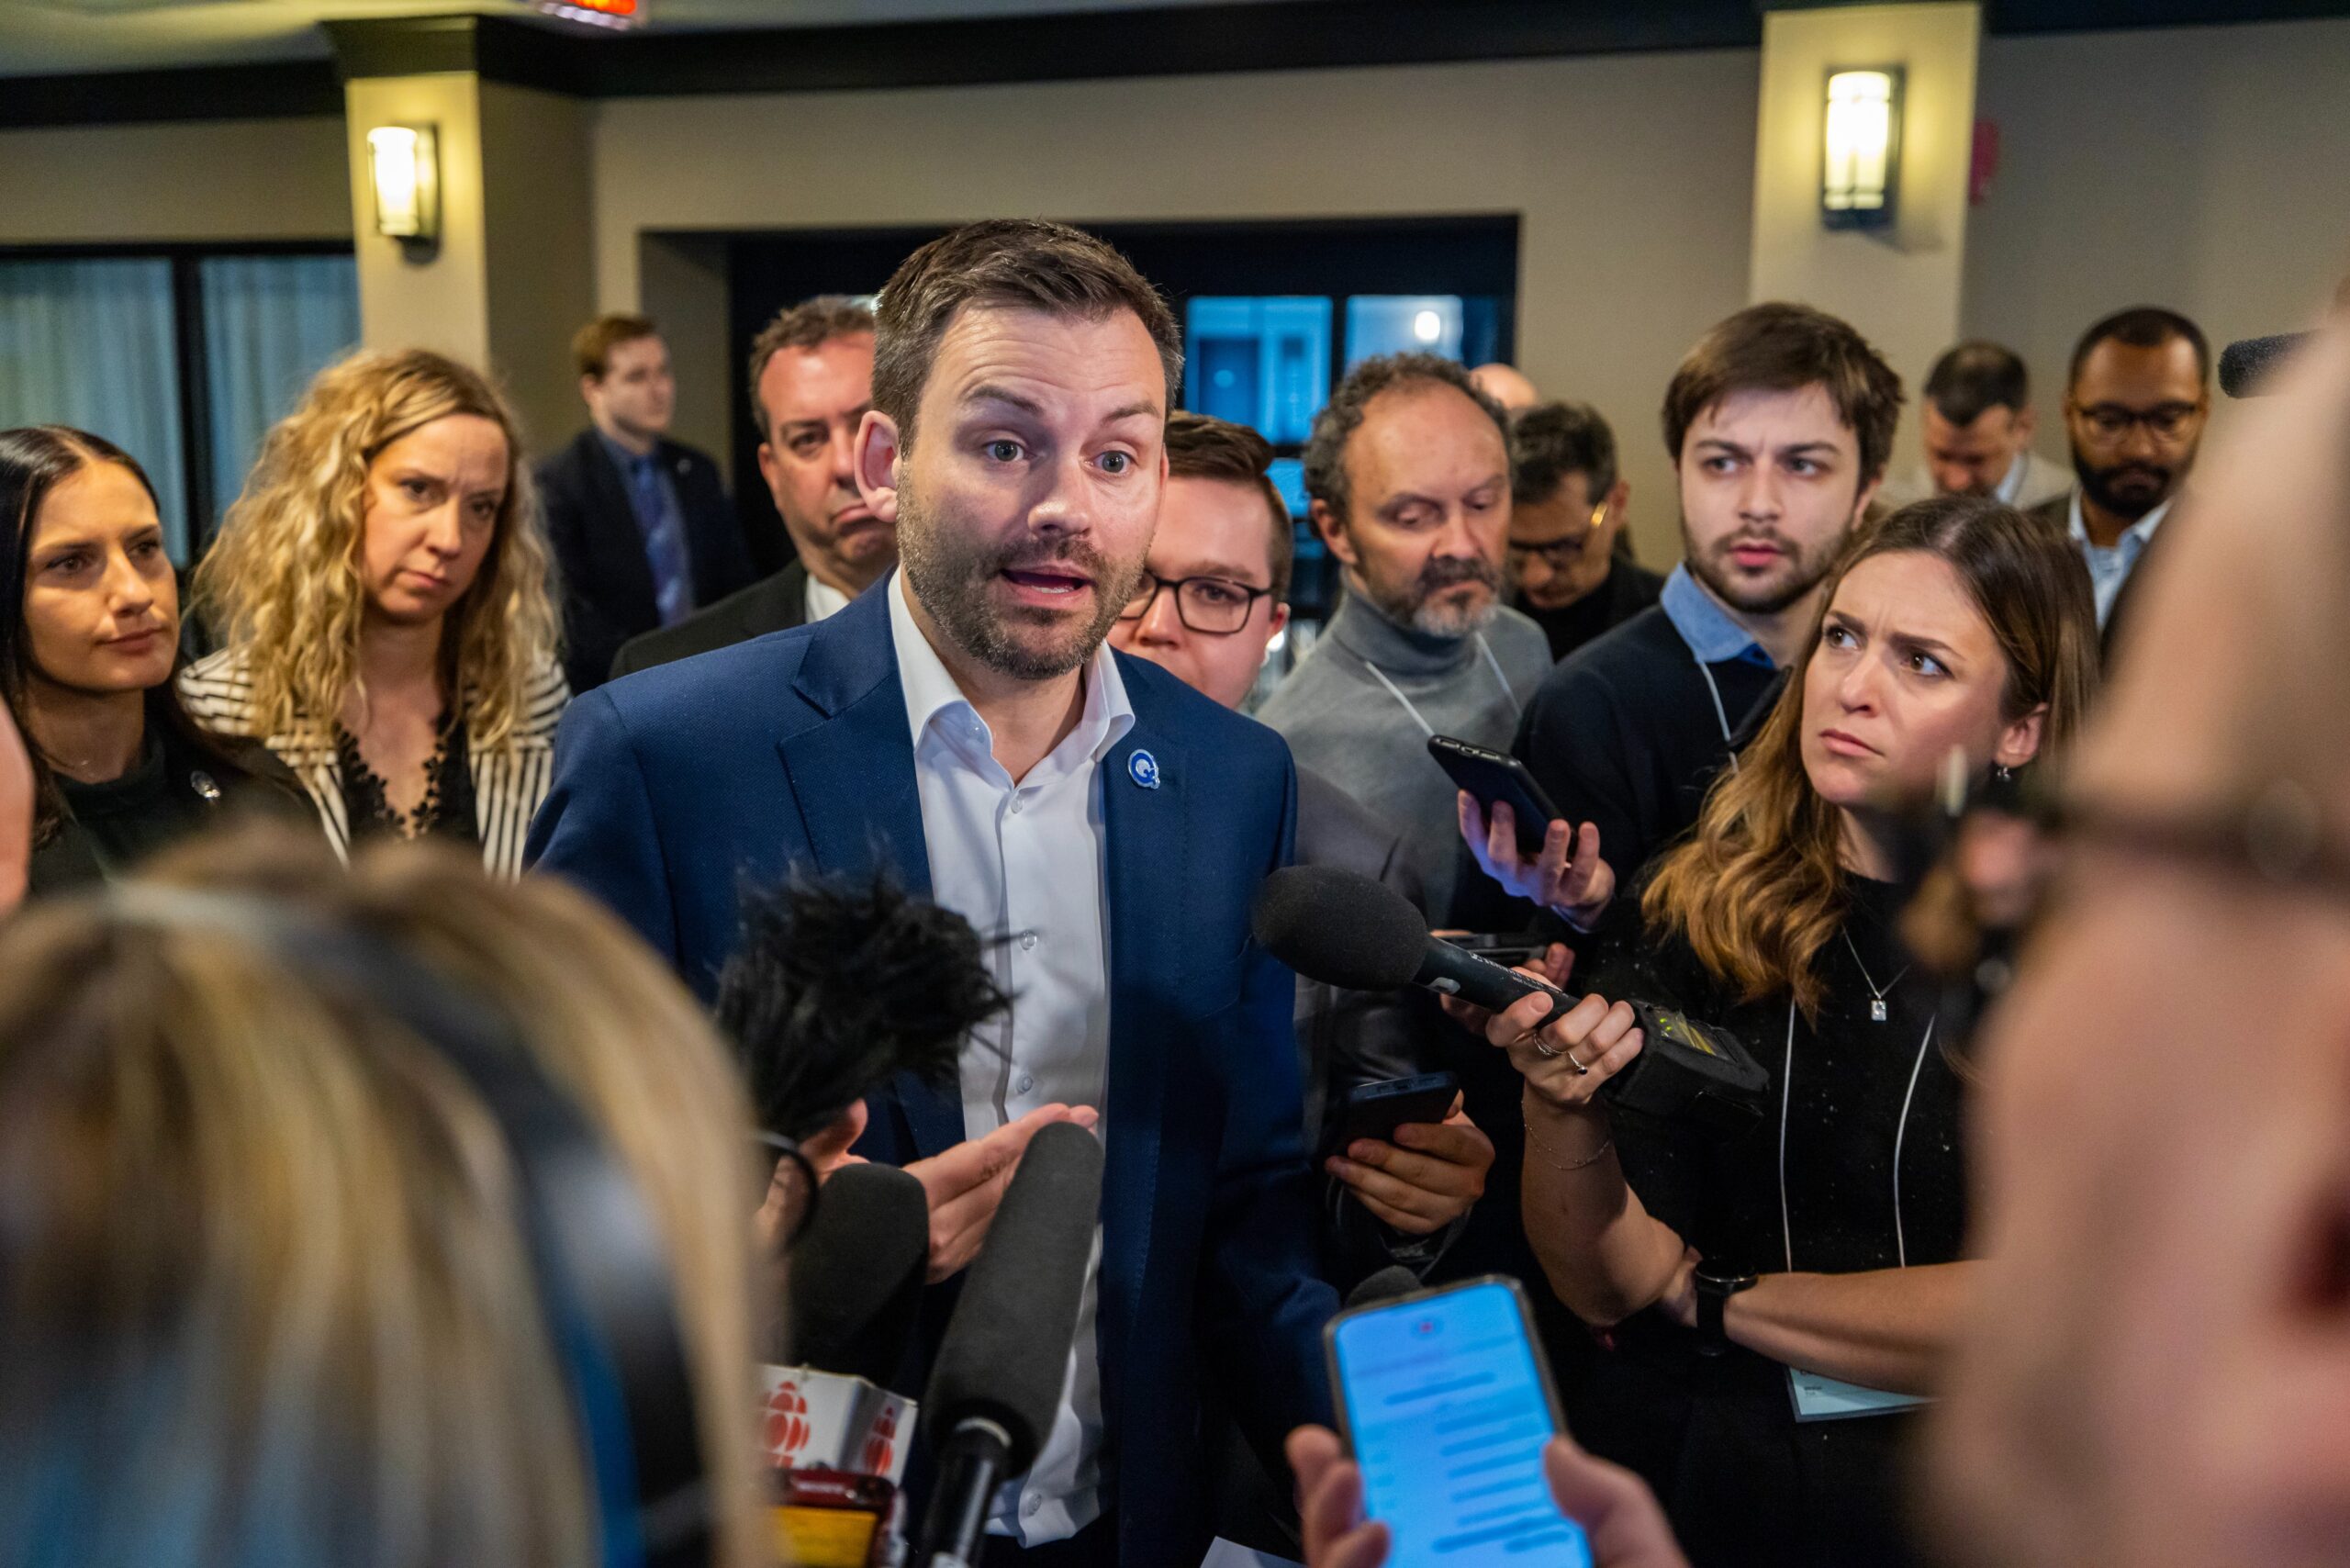 The Parti Québécois needed a wake-up call and they just got one